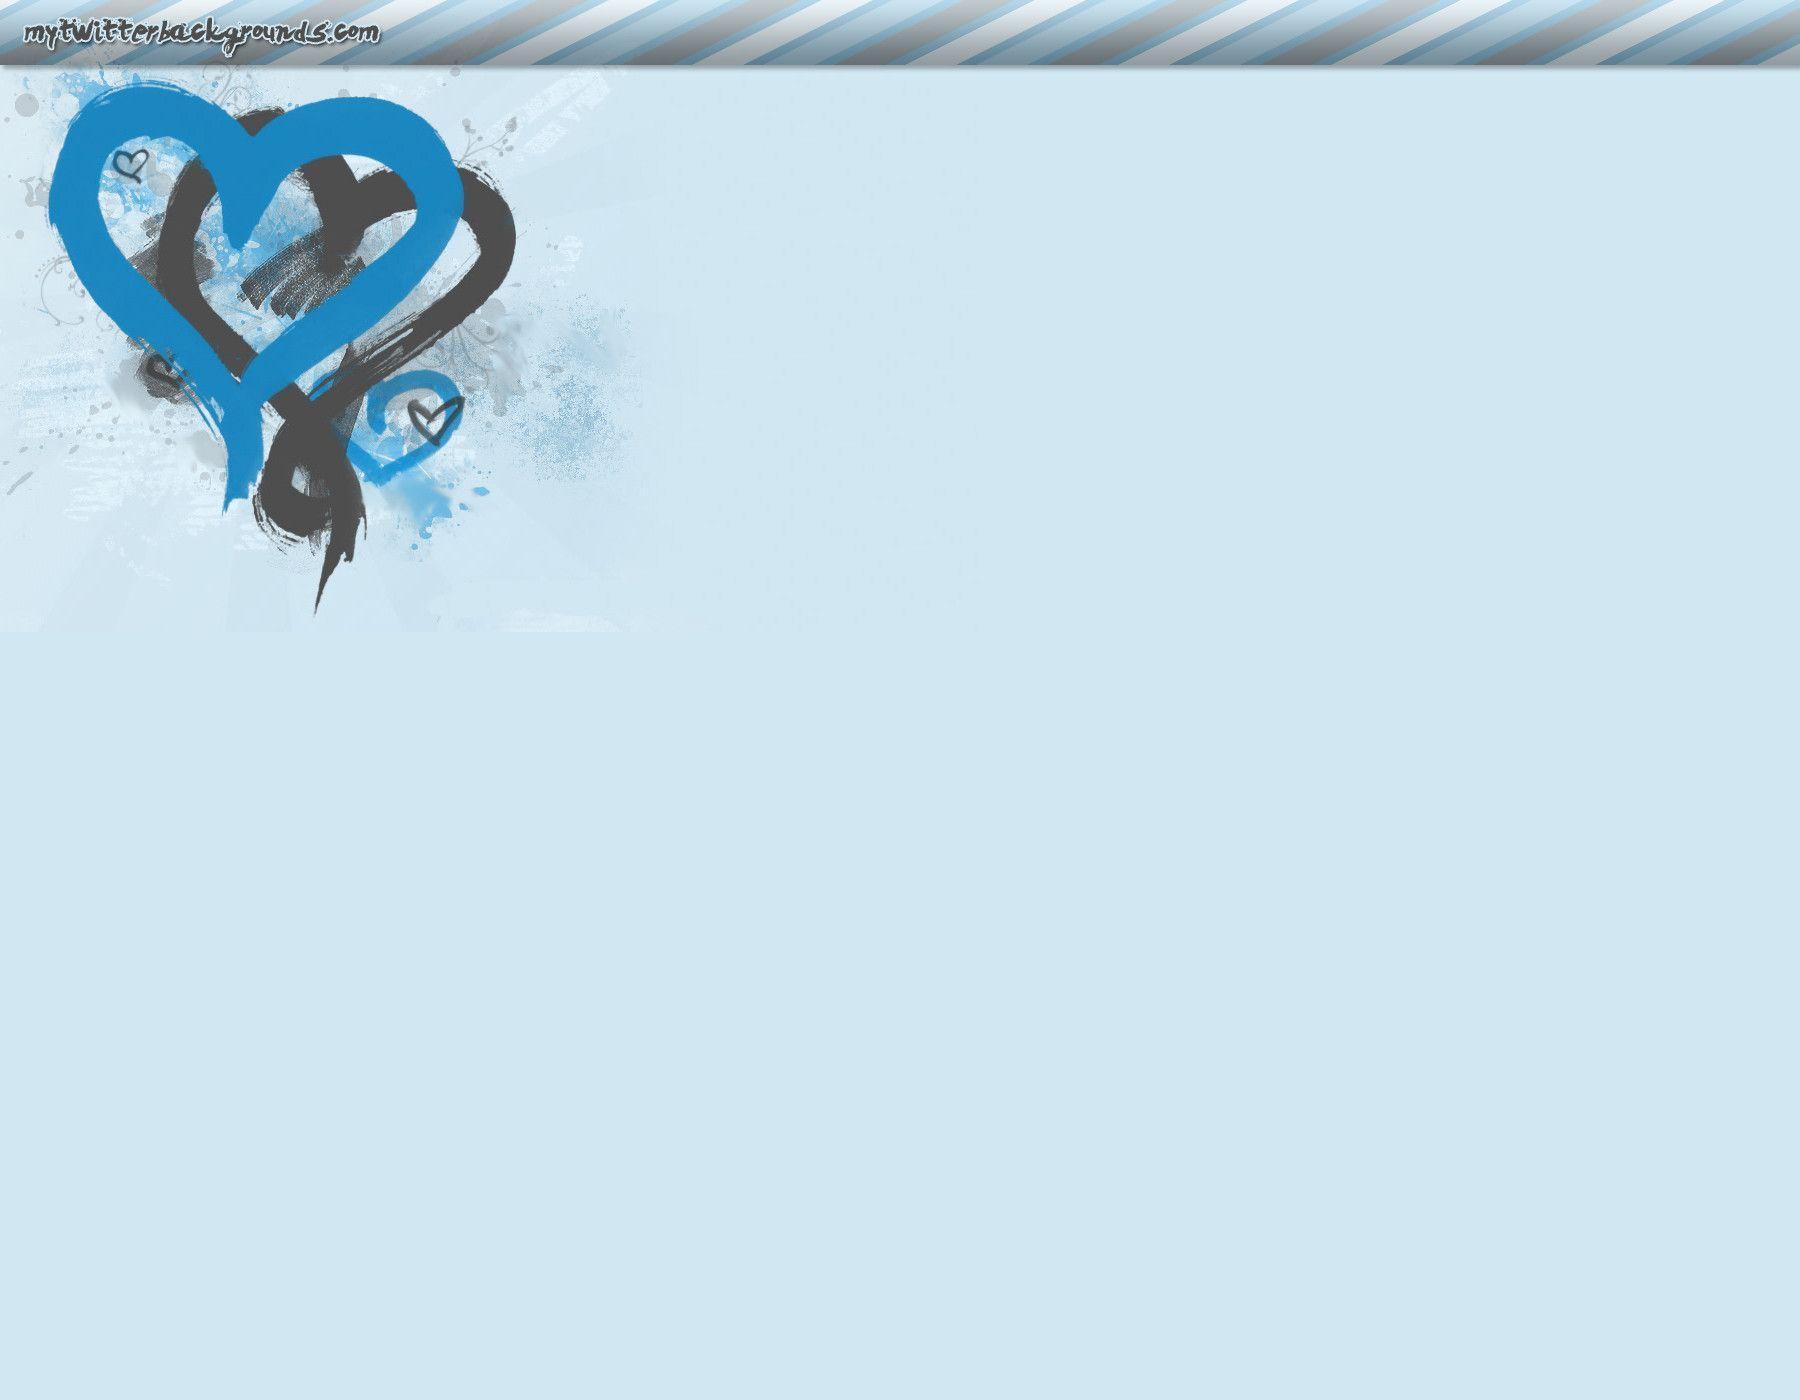 Baby Blue Hearts Twitter Background, Baby Blue Hearts Twitter Themes